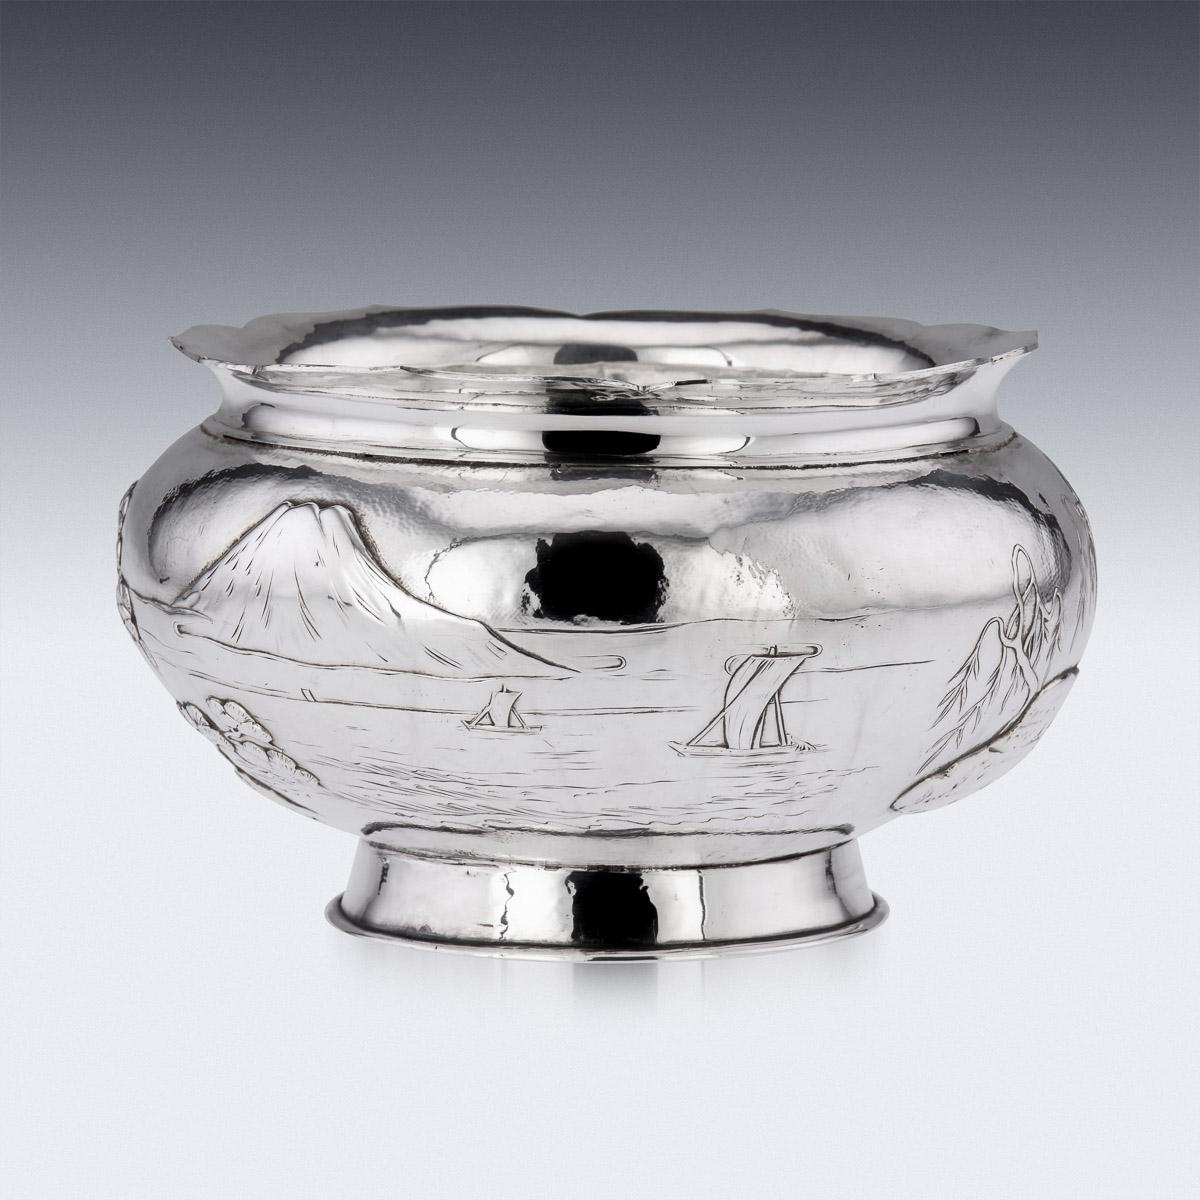 20th Century Japanese Meiji period silver bowl, double walled, depicting the view of mount Fuji from a lake, with boats and small island with banzai trees, on a matted hand hammered ground. The top applied with a shaped floral rim and standing on a